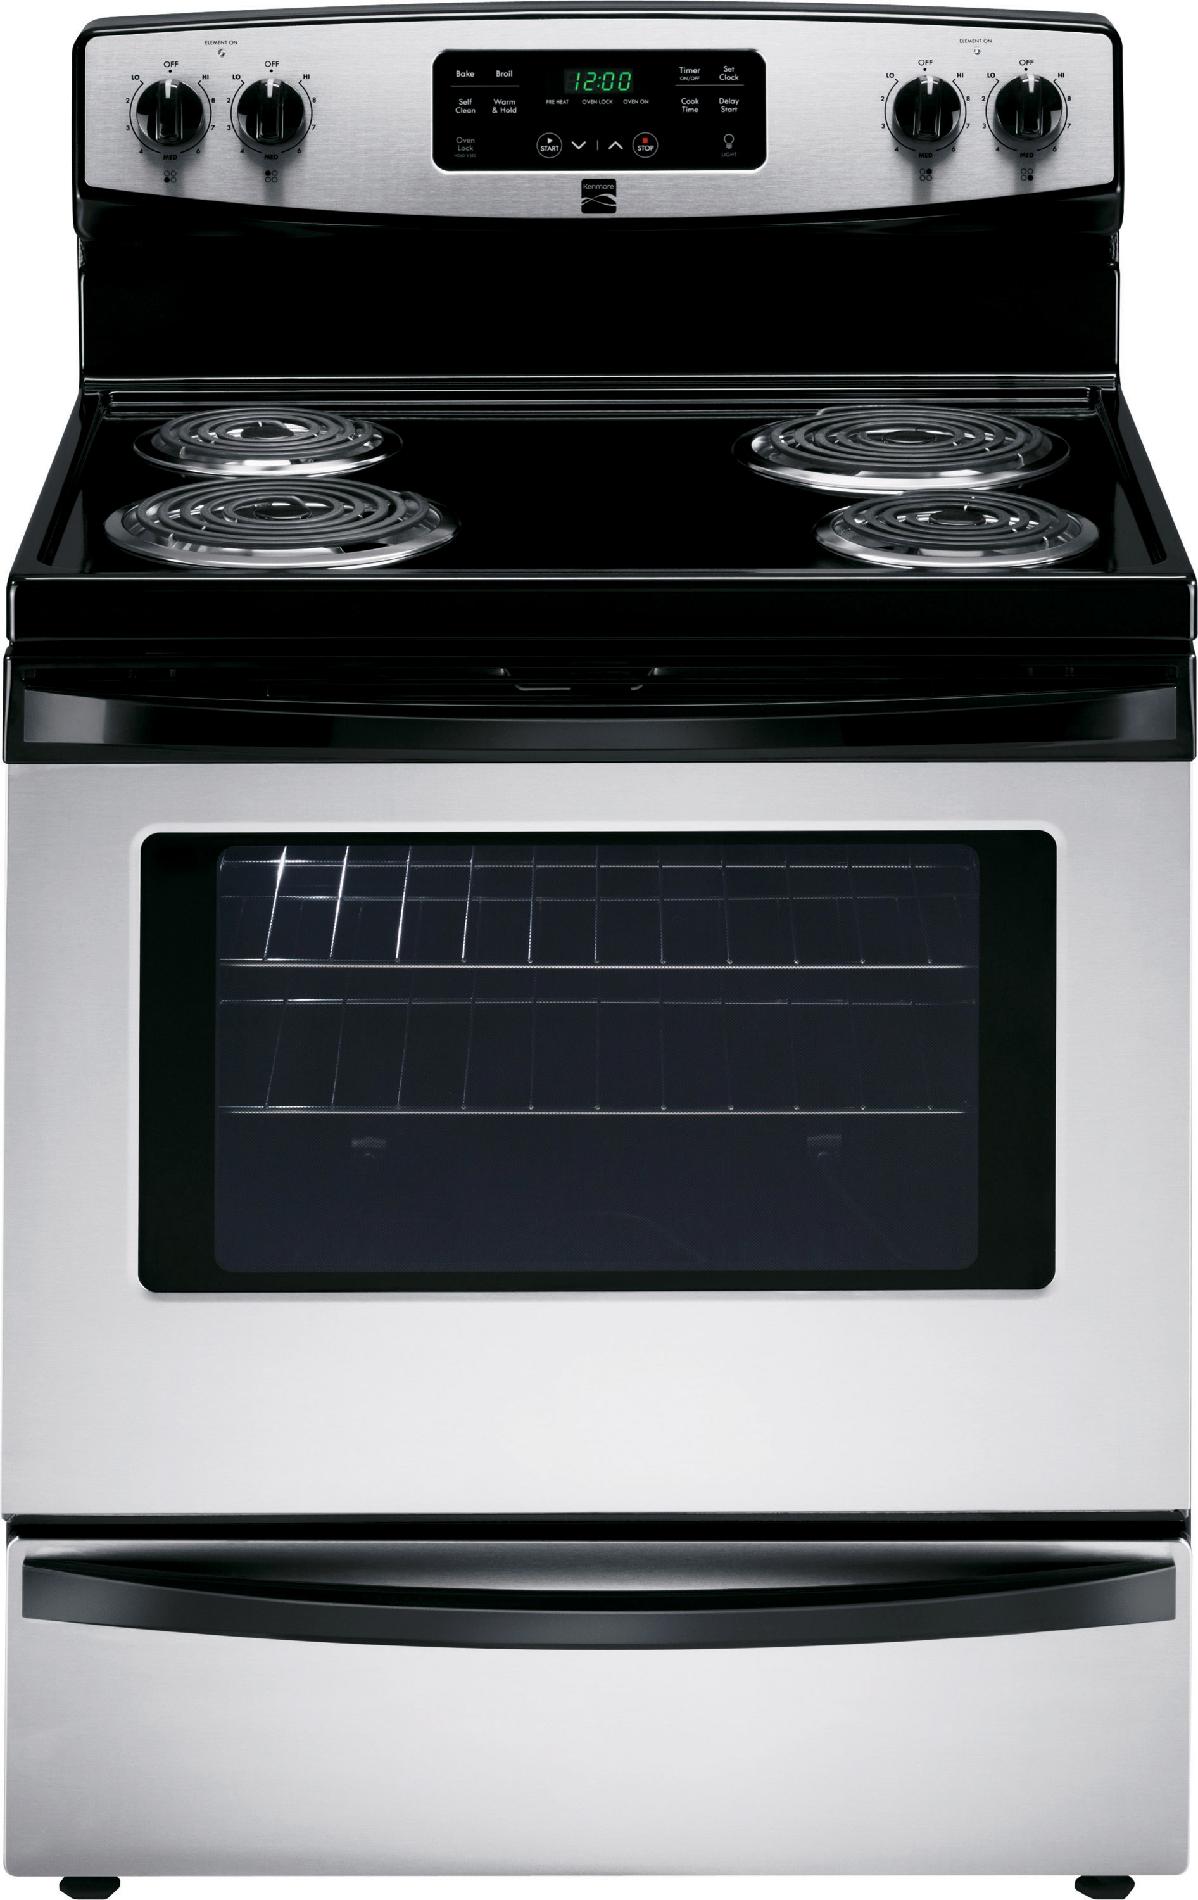 0012505508059 - 94143 5.3 CU. FT. ELECTRIC RANGE W/ SELF-CLEANING OVEN - STAINLESS STEEL